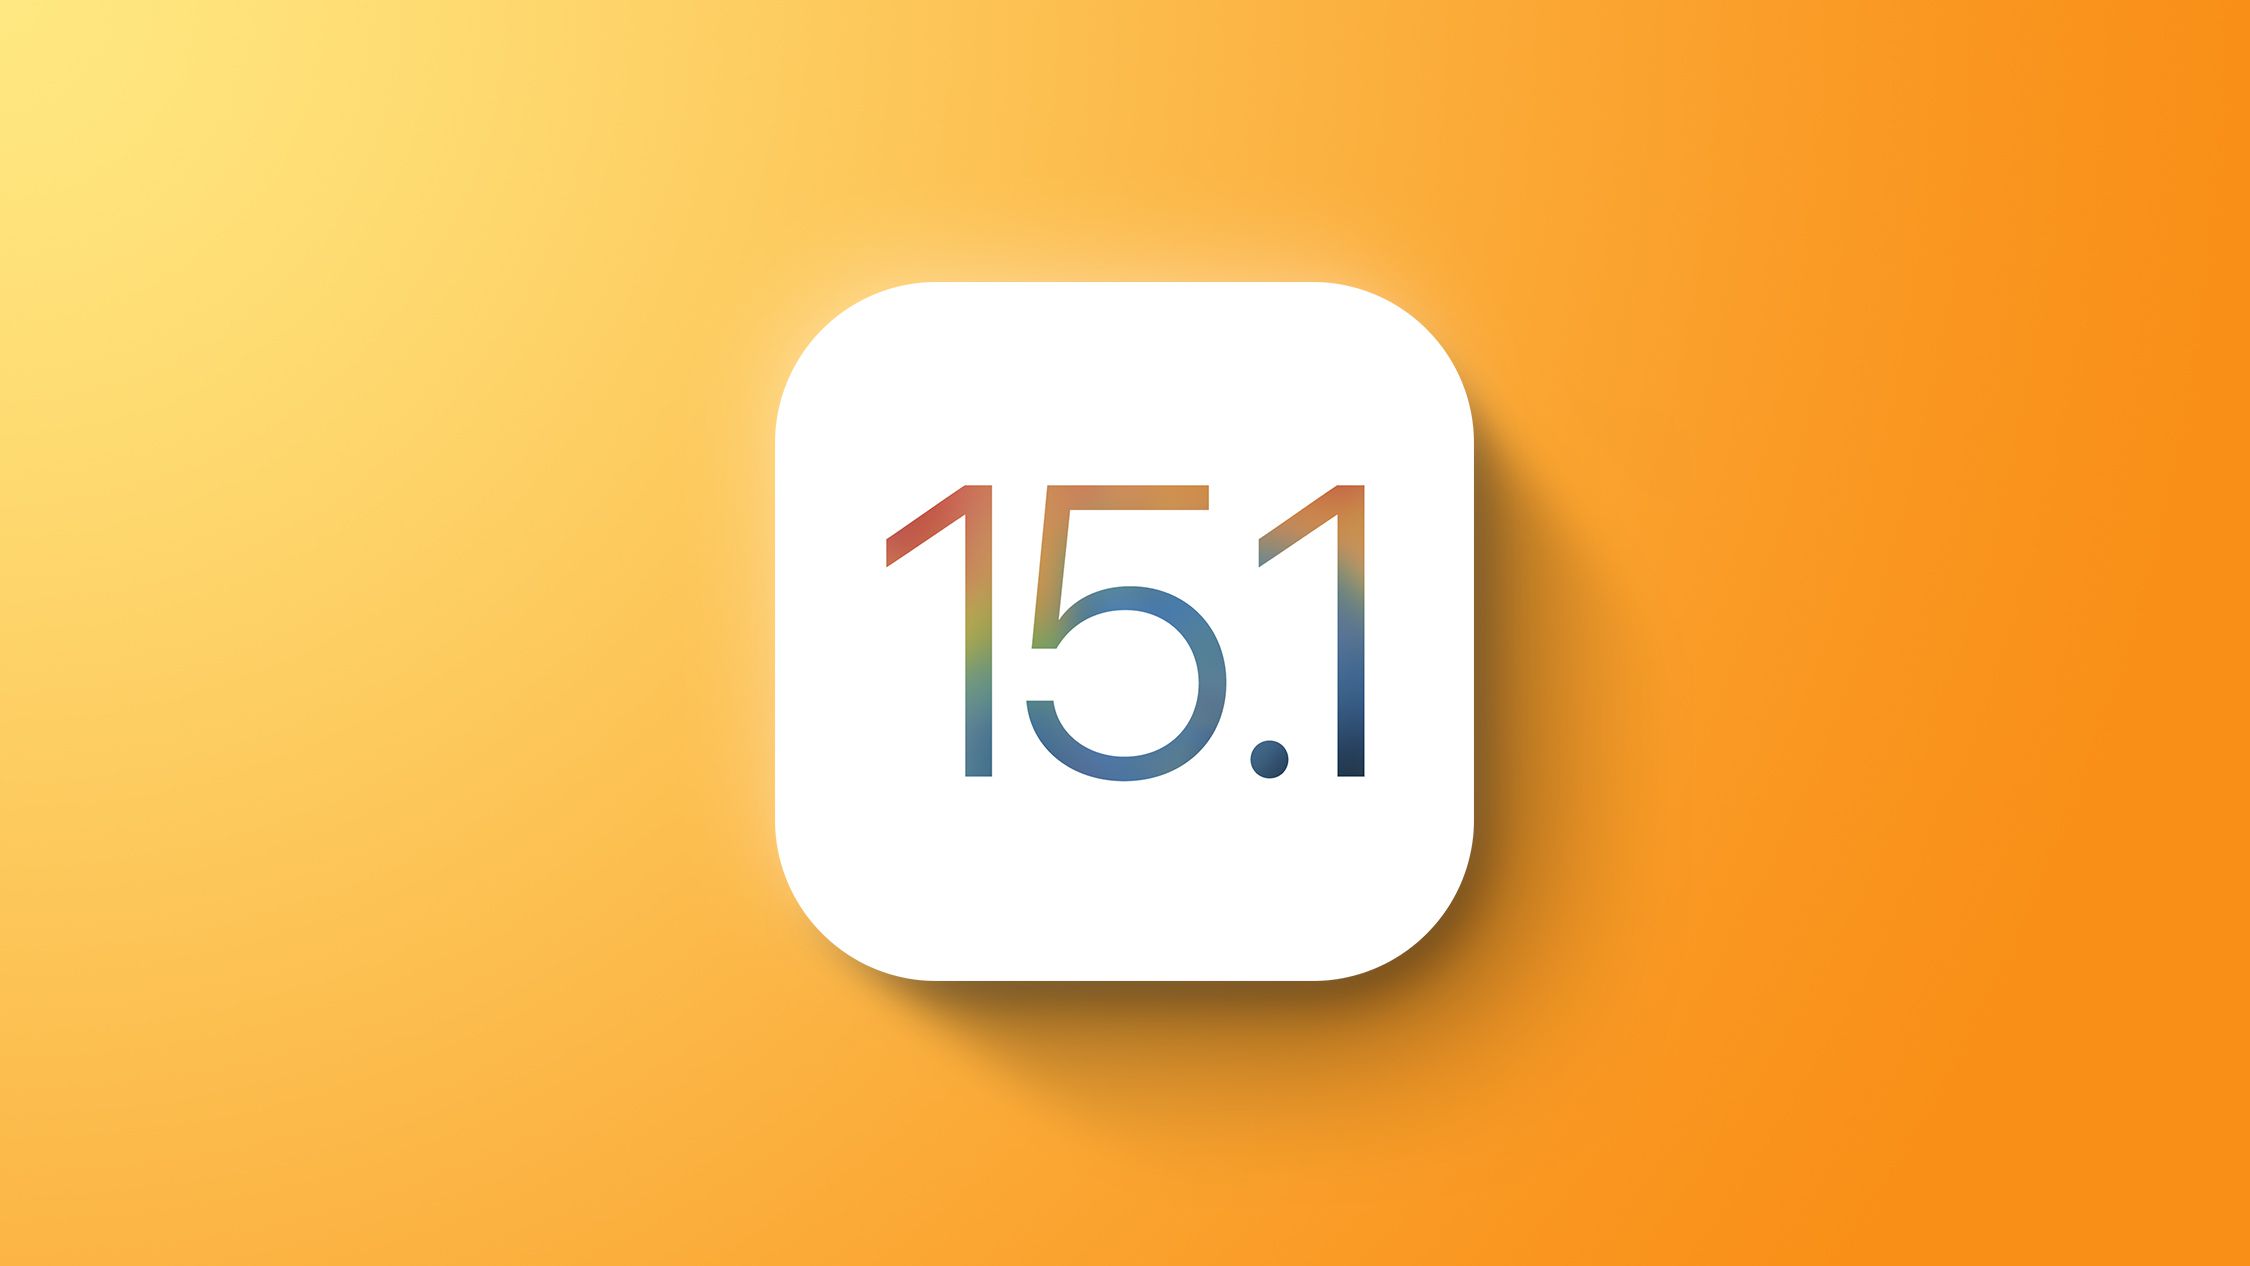 Apple Releases iOS 15.1 and iPadOS 15.1 With SharePlay, ProRes, Auto Macro Toggle, Vaccine Cards in... - MacRumors